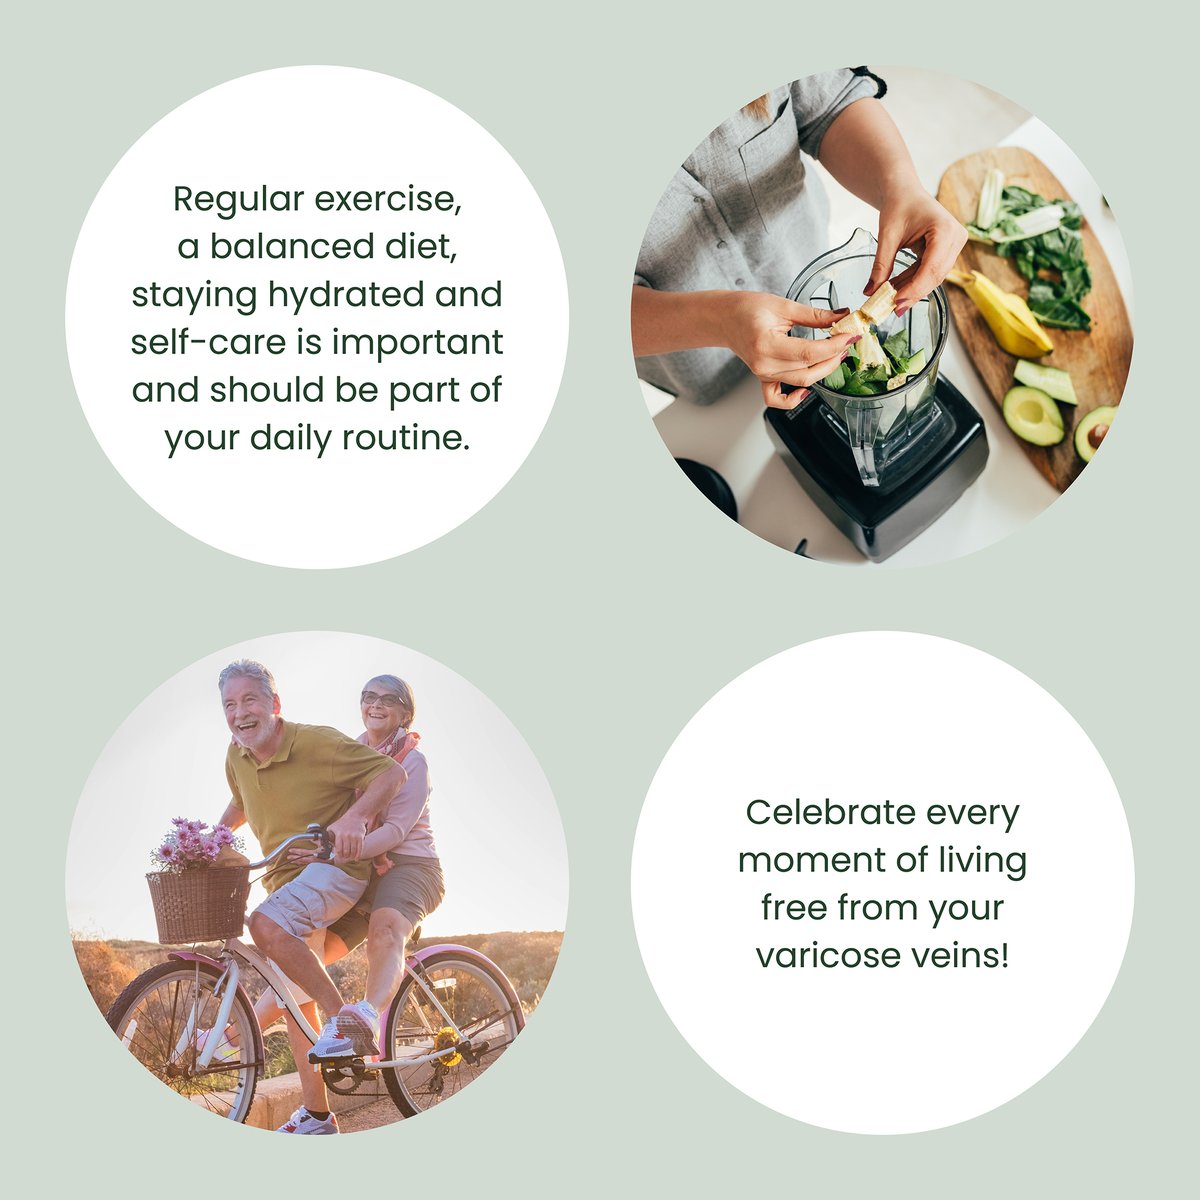 Is your vein health holding you back from fully enjoying life? By having your veins treated, you will be able to enjoy so many things without giving your veins a second thought. Here are some ways you can celebrate your new found confidence... #veinhealth #healthcare #lifestyle